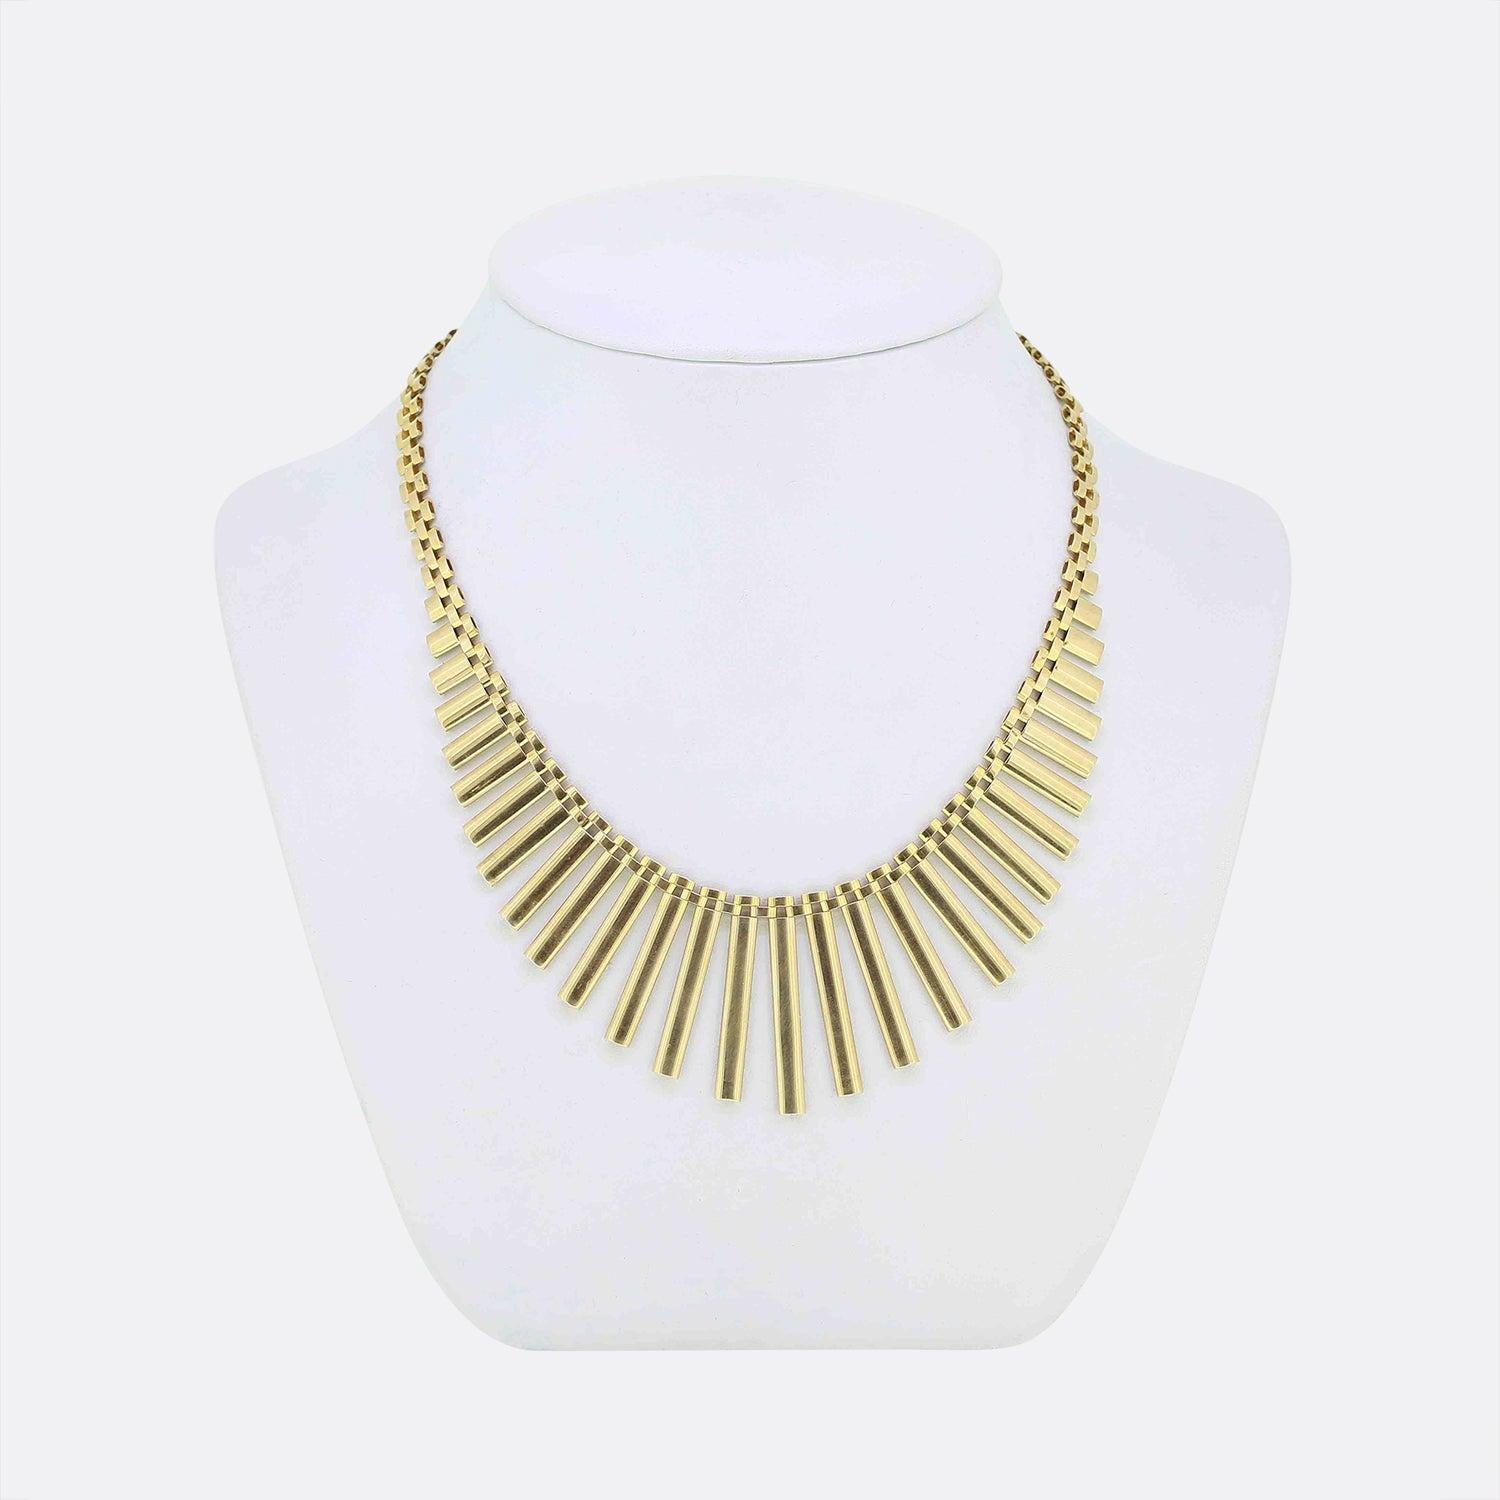 This is a wonderful vintage cleopatra fancy link necklace which has been crafted in 9ct yellow gold with a secure push down clasp. 

Condition: Used (Very Good)
Weight: 26.3 grams
Chain Length: 16 inches
Chain Width: 5mm-35mm
Hallmarked: Yes, London